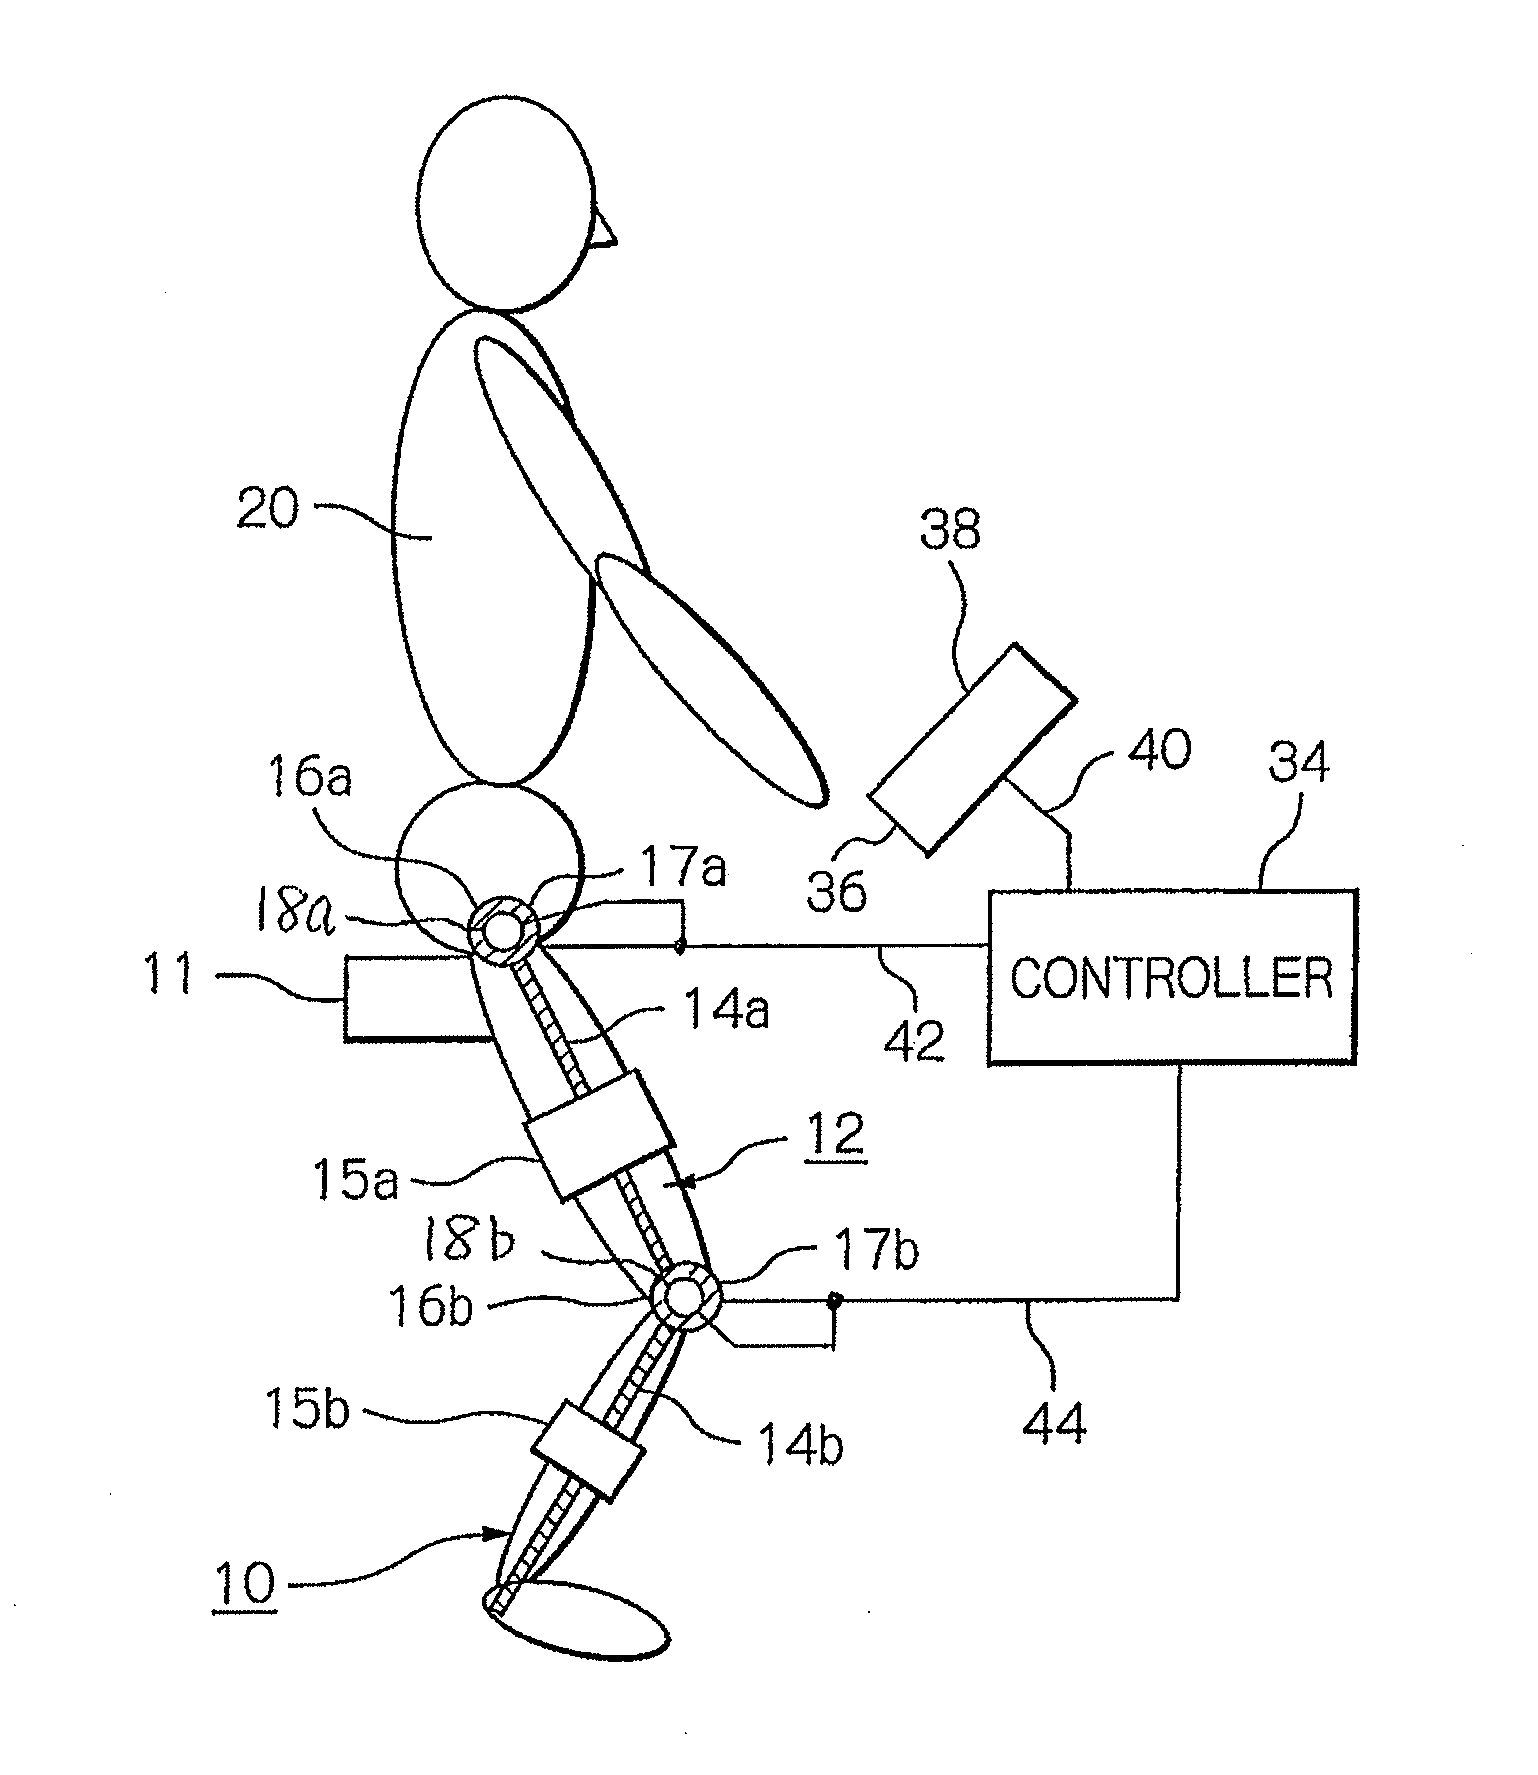 Resistance training device exerting a constant load without depending upon position